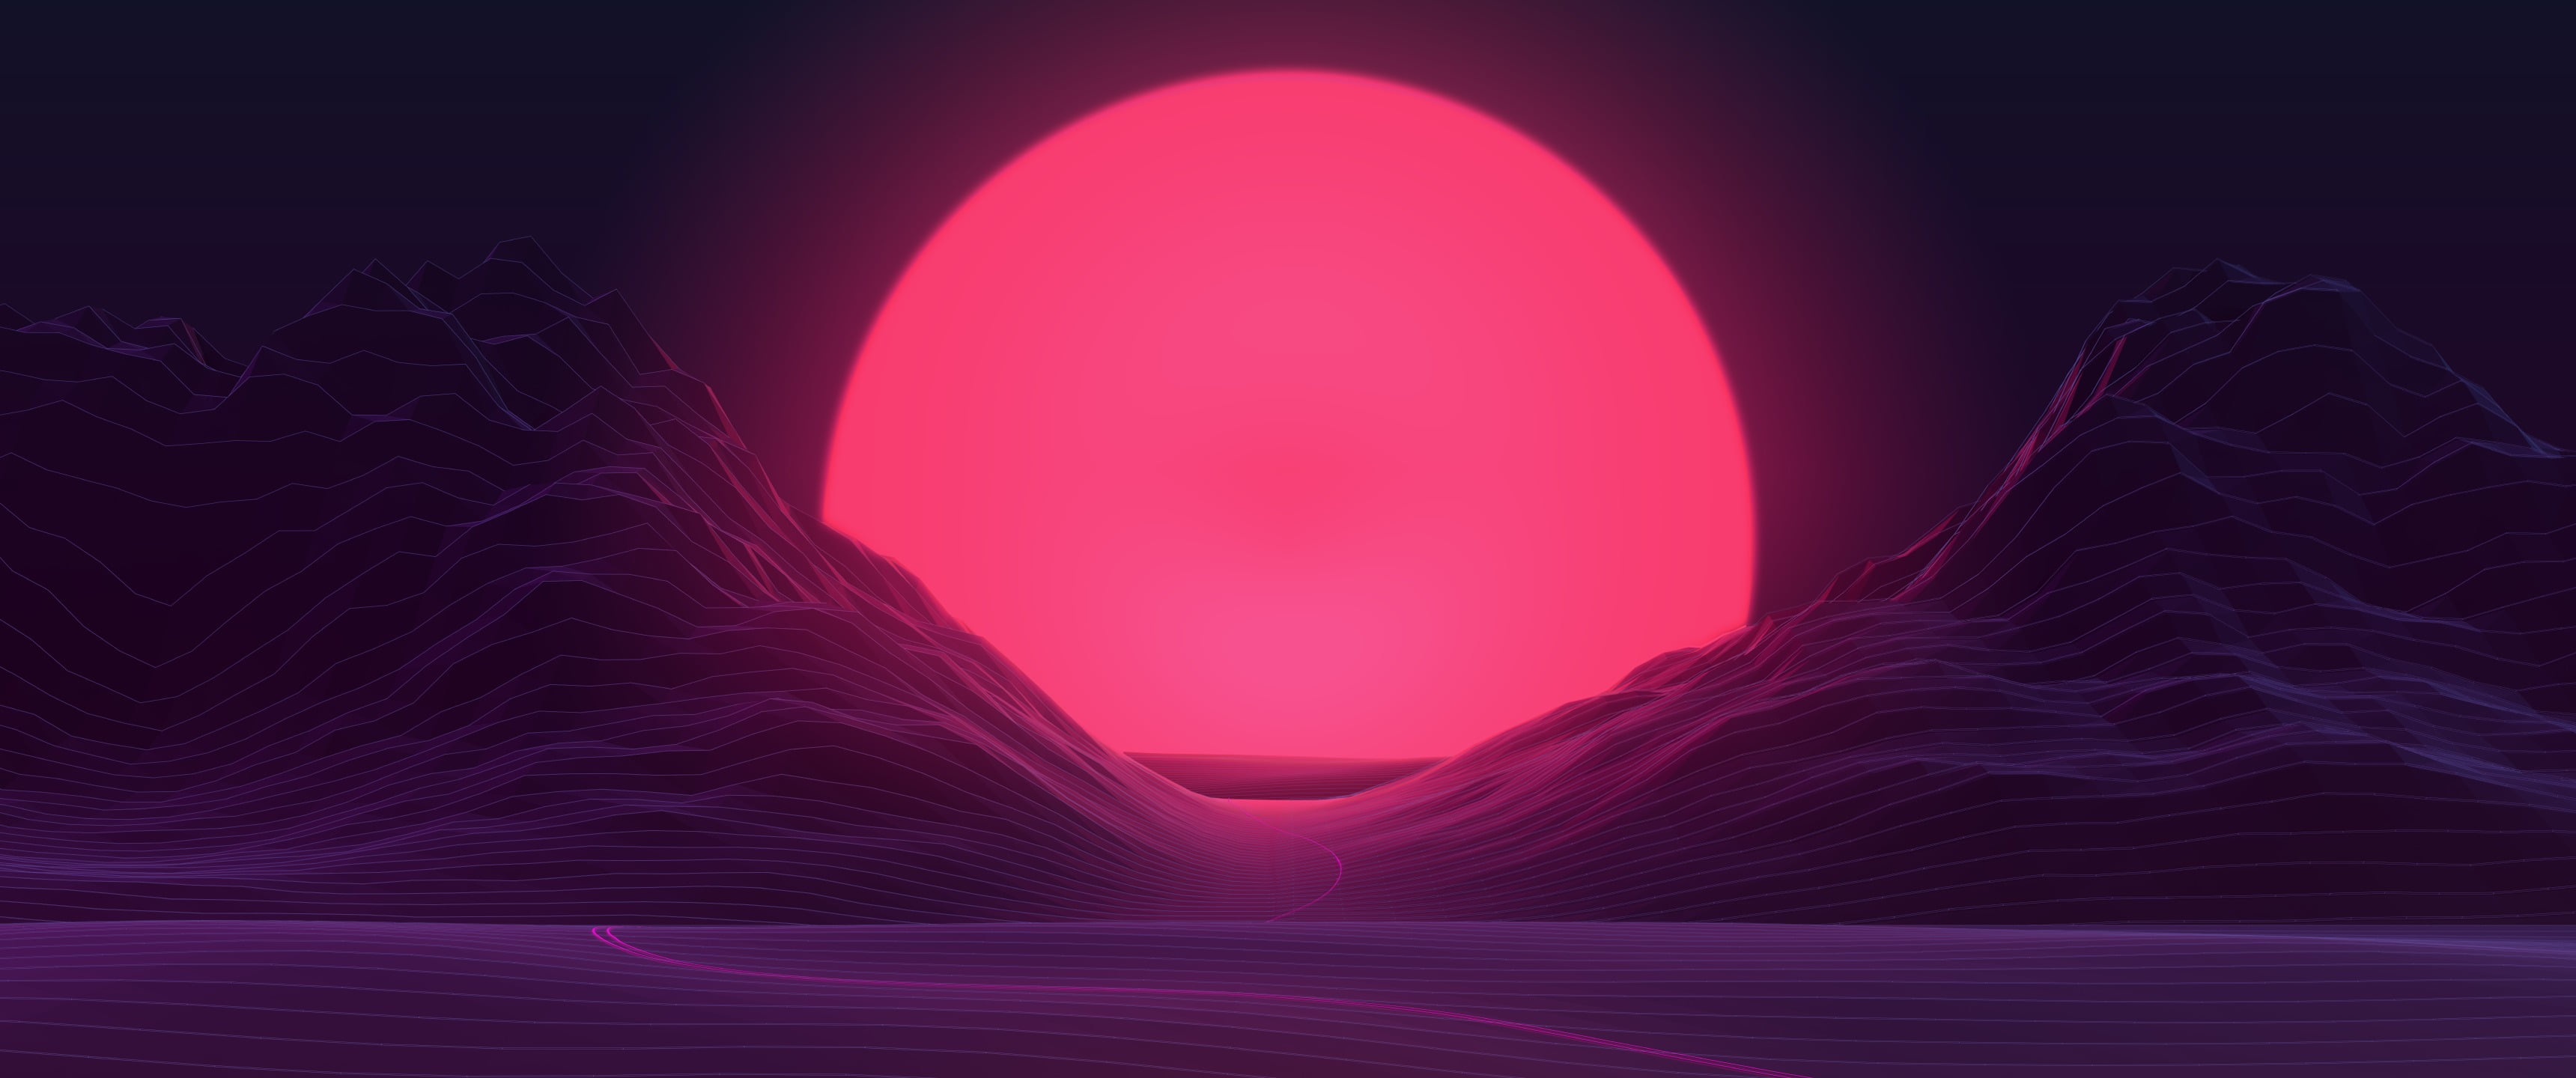 full moon walllpaper, sunset, neon, mountains, pink color, technology